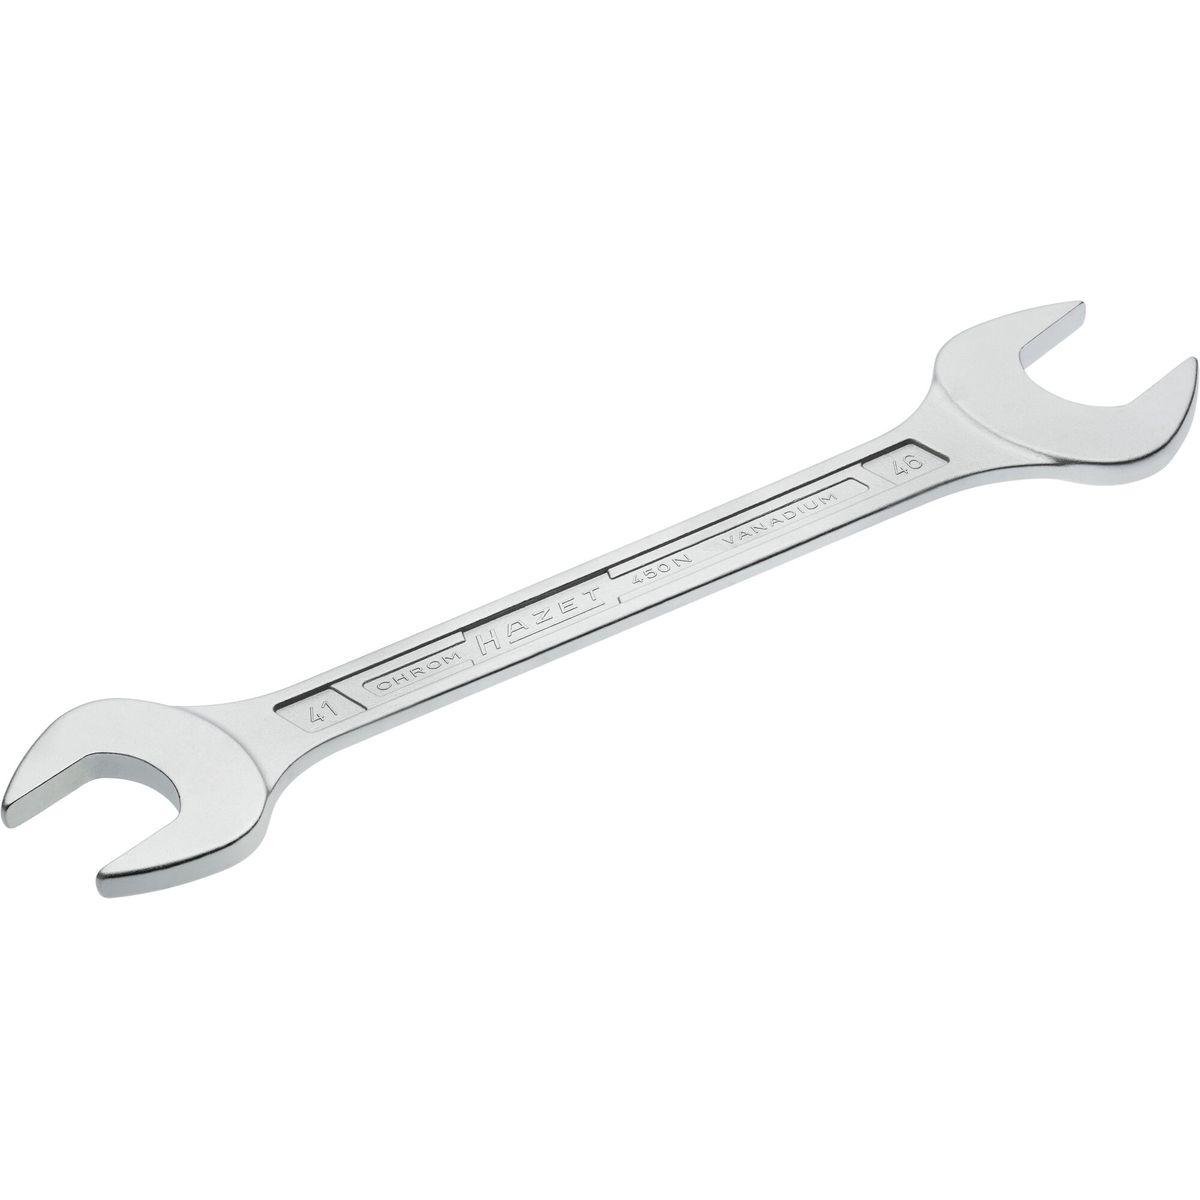 Double Open-End Wrench No.450N-41x46 Hazet®